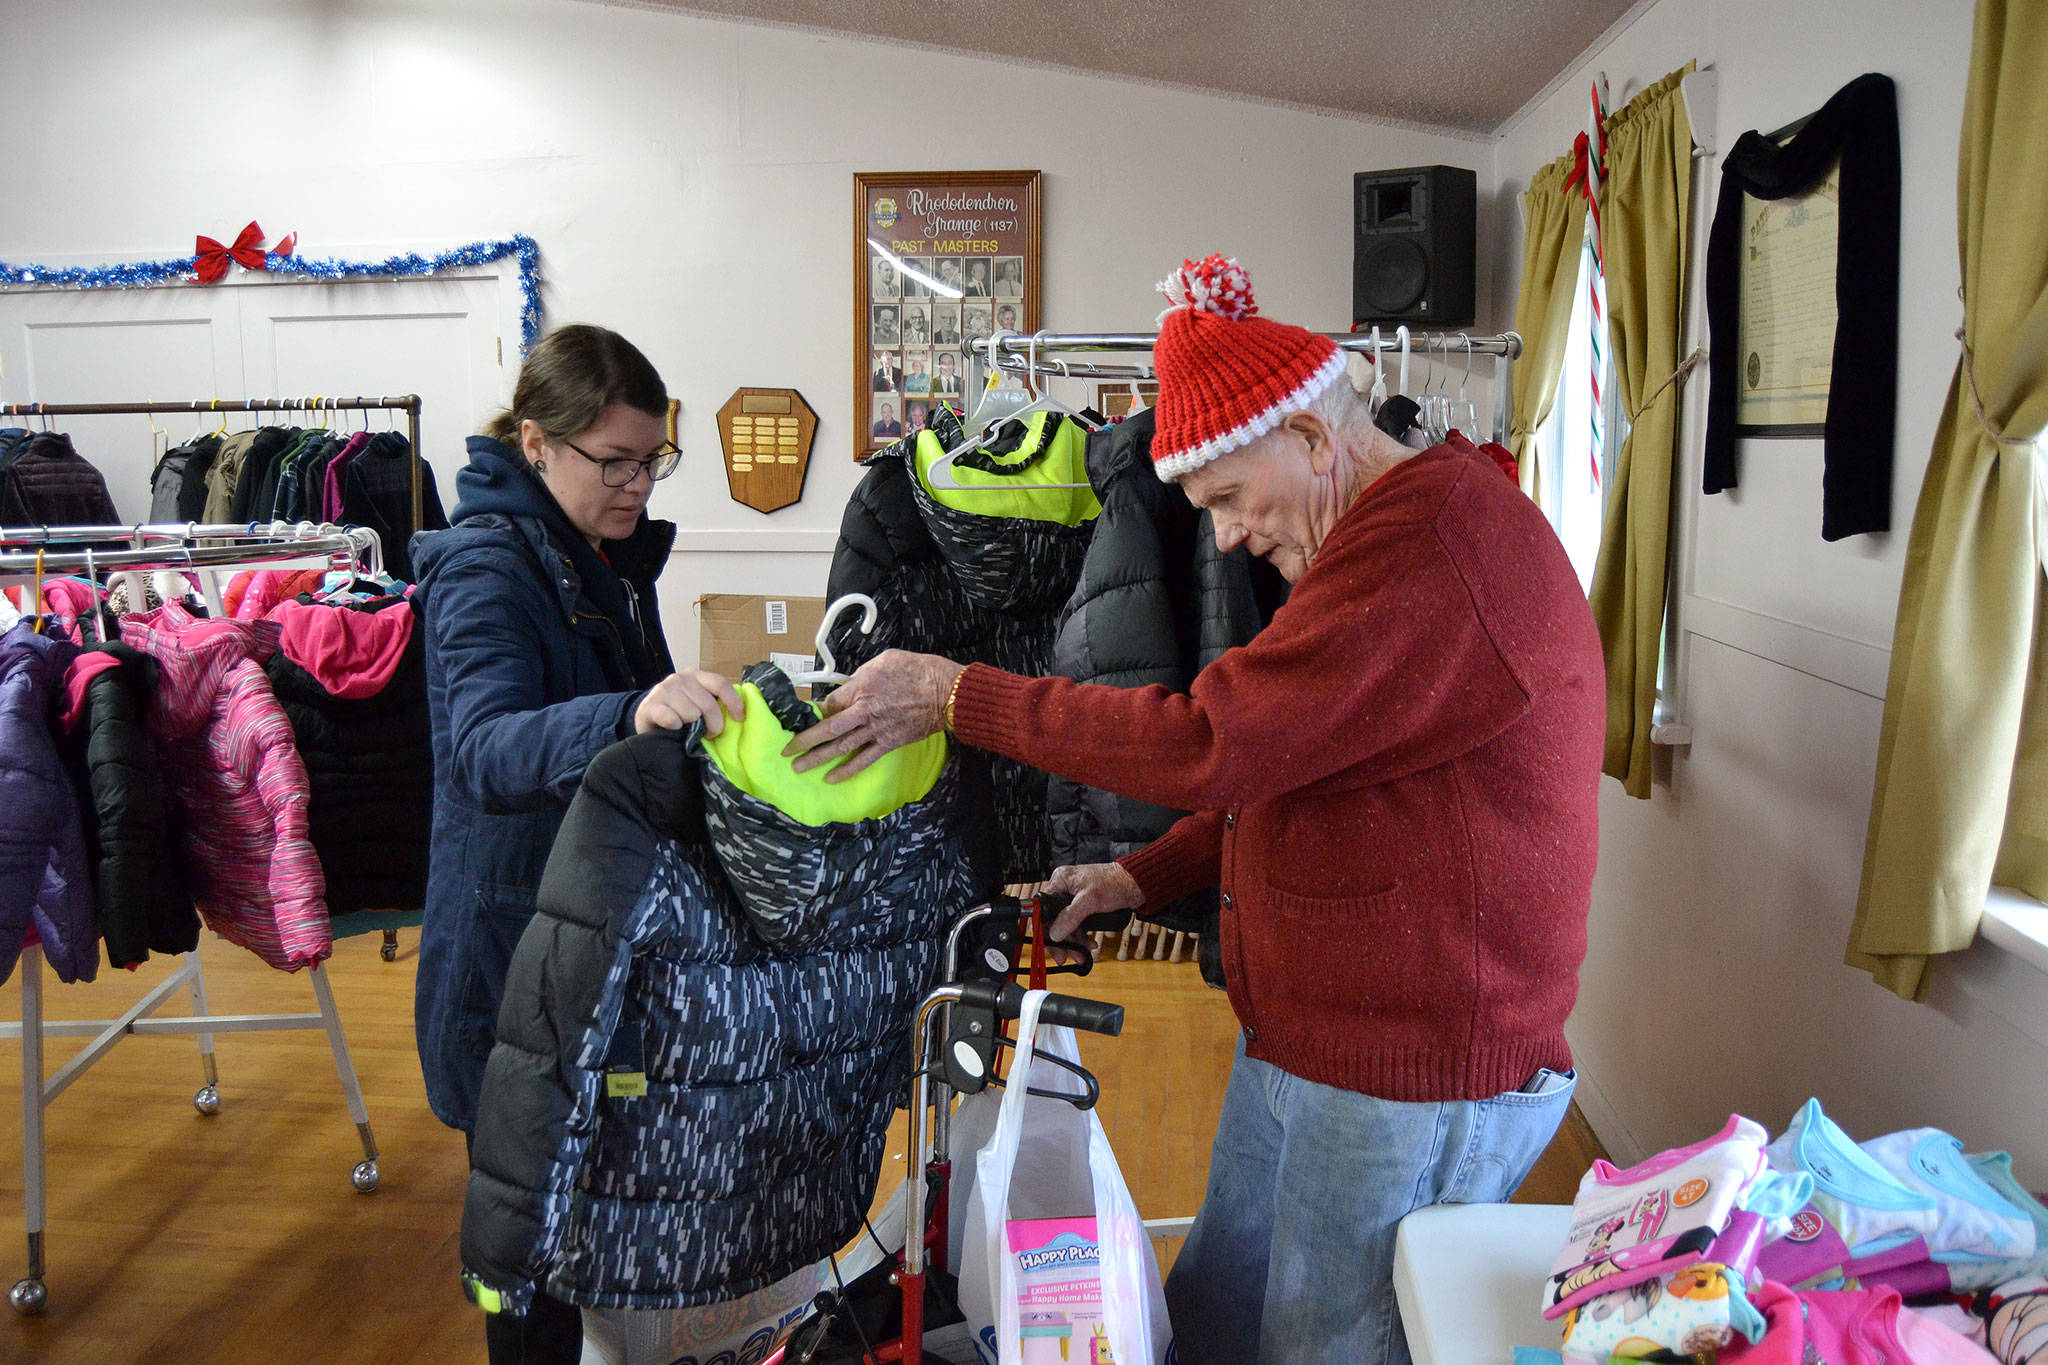 At last year’s Toys for Sequim Kids, Amber Ahrens of Sequim inspects a coat with volunteer Jack Keith. Organizers said last year’s event helped more than 350 children receive toys, games, clothes and more for Christmas. Sequim Gazette file photo by Matthew Nash